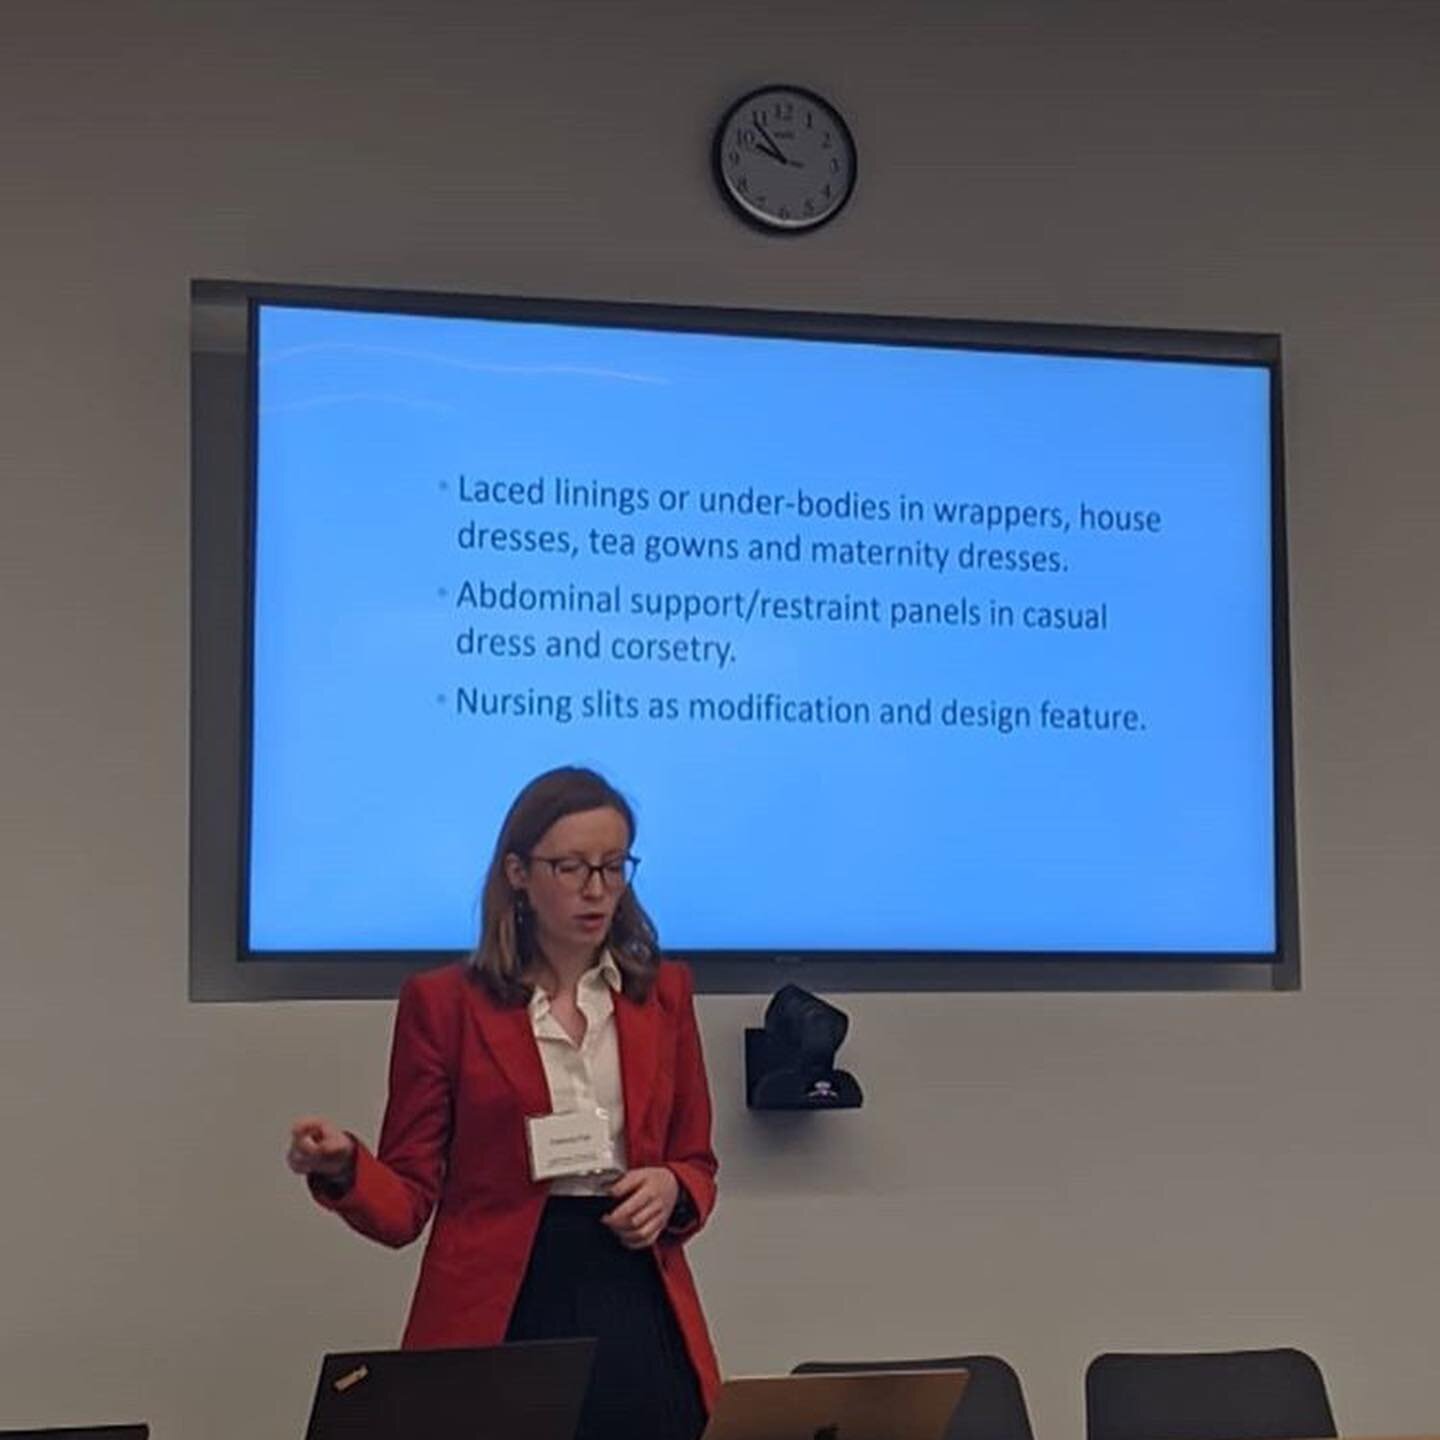 Some action shots from yesterday&rsquo;s paper on experimentation and transformation in domestic maternity dress at the scintillating American Everyday conference. Images courtesy of @doris_ddl. #materialmaternity